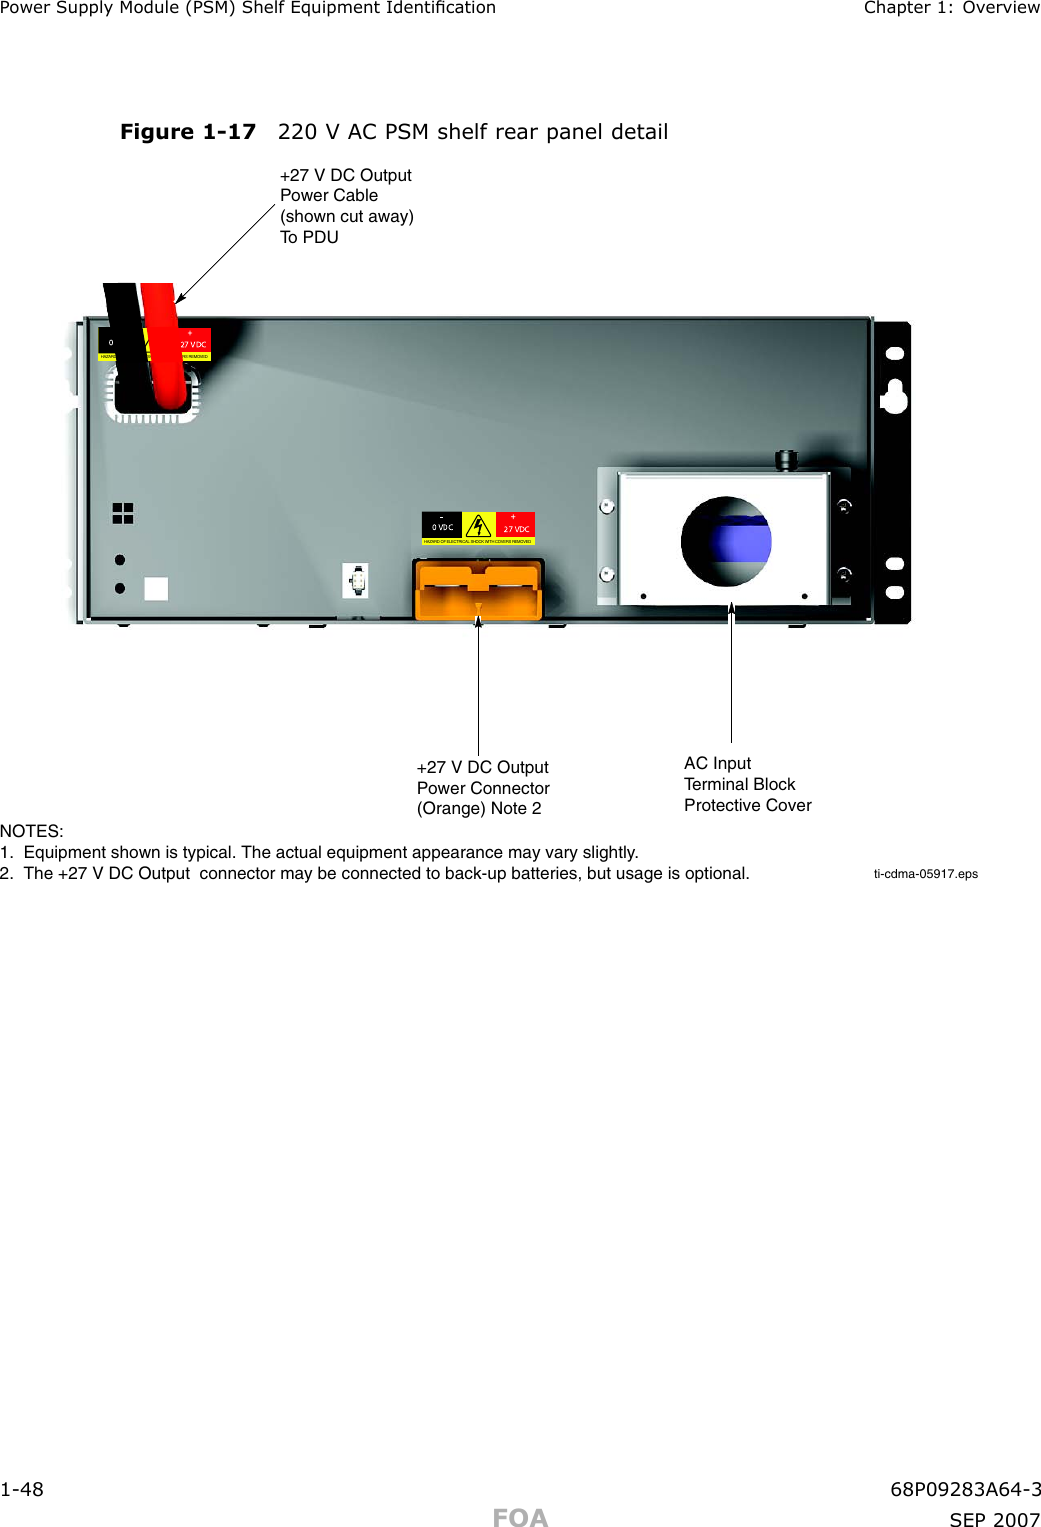 P ower Supply Module (PSM) Shelf Equipment Identication Chapter 1: Ov erviewFigure 1 -17 220 V AC PSM shelf rear panel detailti-cdma-05917.eps+27 V DC Output Power Connector (Orange) Note 2AC Input Terminal Block Protective CoverNOTES:1.  Equipment shown is typical. The actual equipment appearance may vary slightly.2.  The +27 V DC Output  connector may be connected to back-up batteries, but usage is optional.+27 V DC Output Power Cable (shown cut away) To PDU    _0 VDC    +27 VDCHAZARD OF ELECTRICAL SHOCK WITH COVERS REMOVED    _0 VDC    +27 VDCHAZARD OF ELECTRICAL SHOCK WITH COVERS REMOVED1 -48 68P09283A64 -3FOA SEP 2007